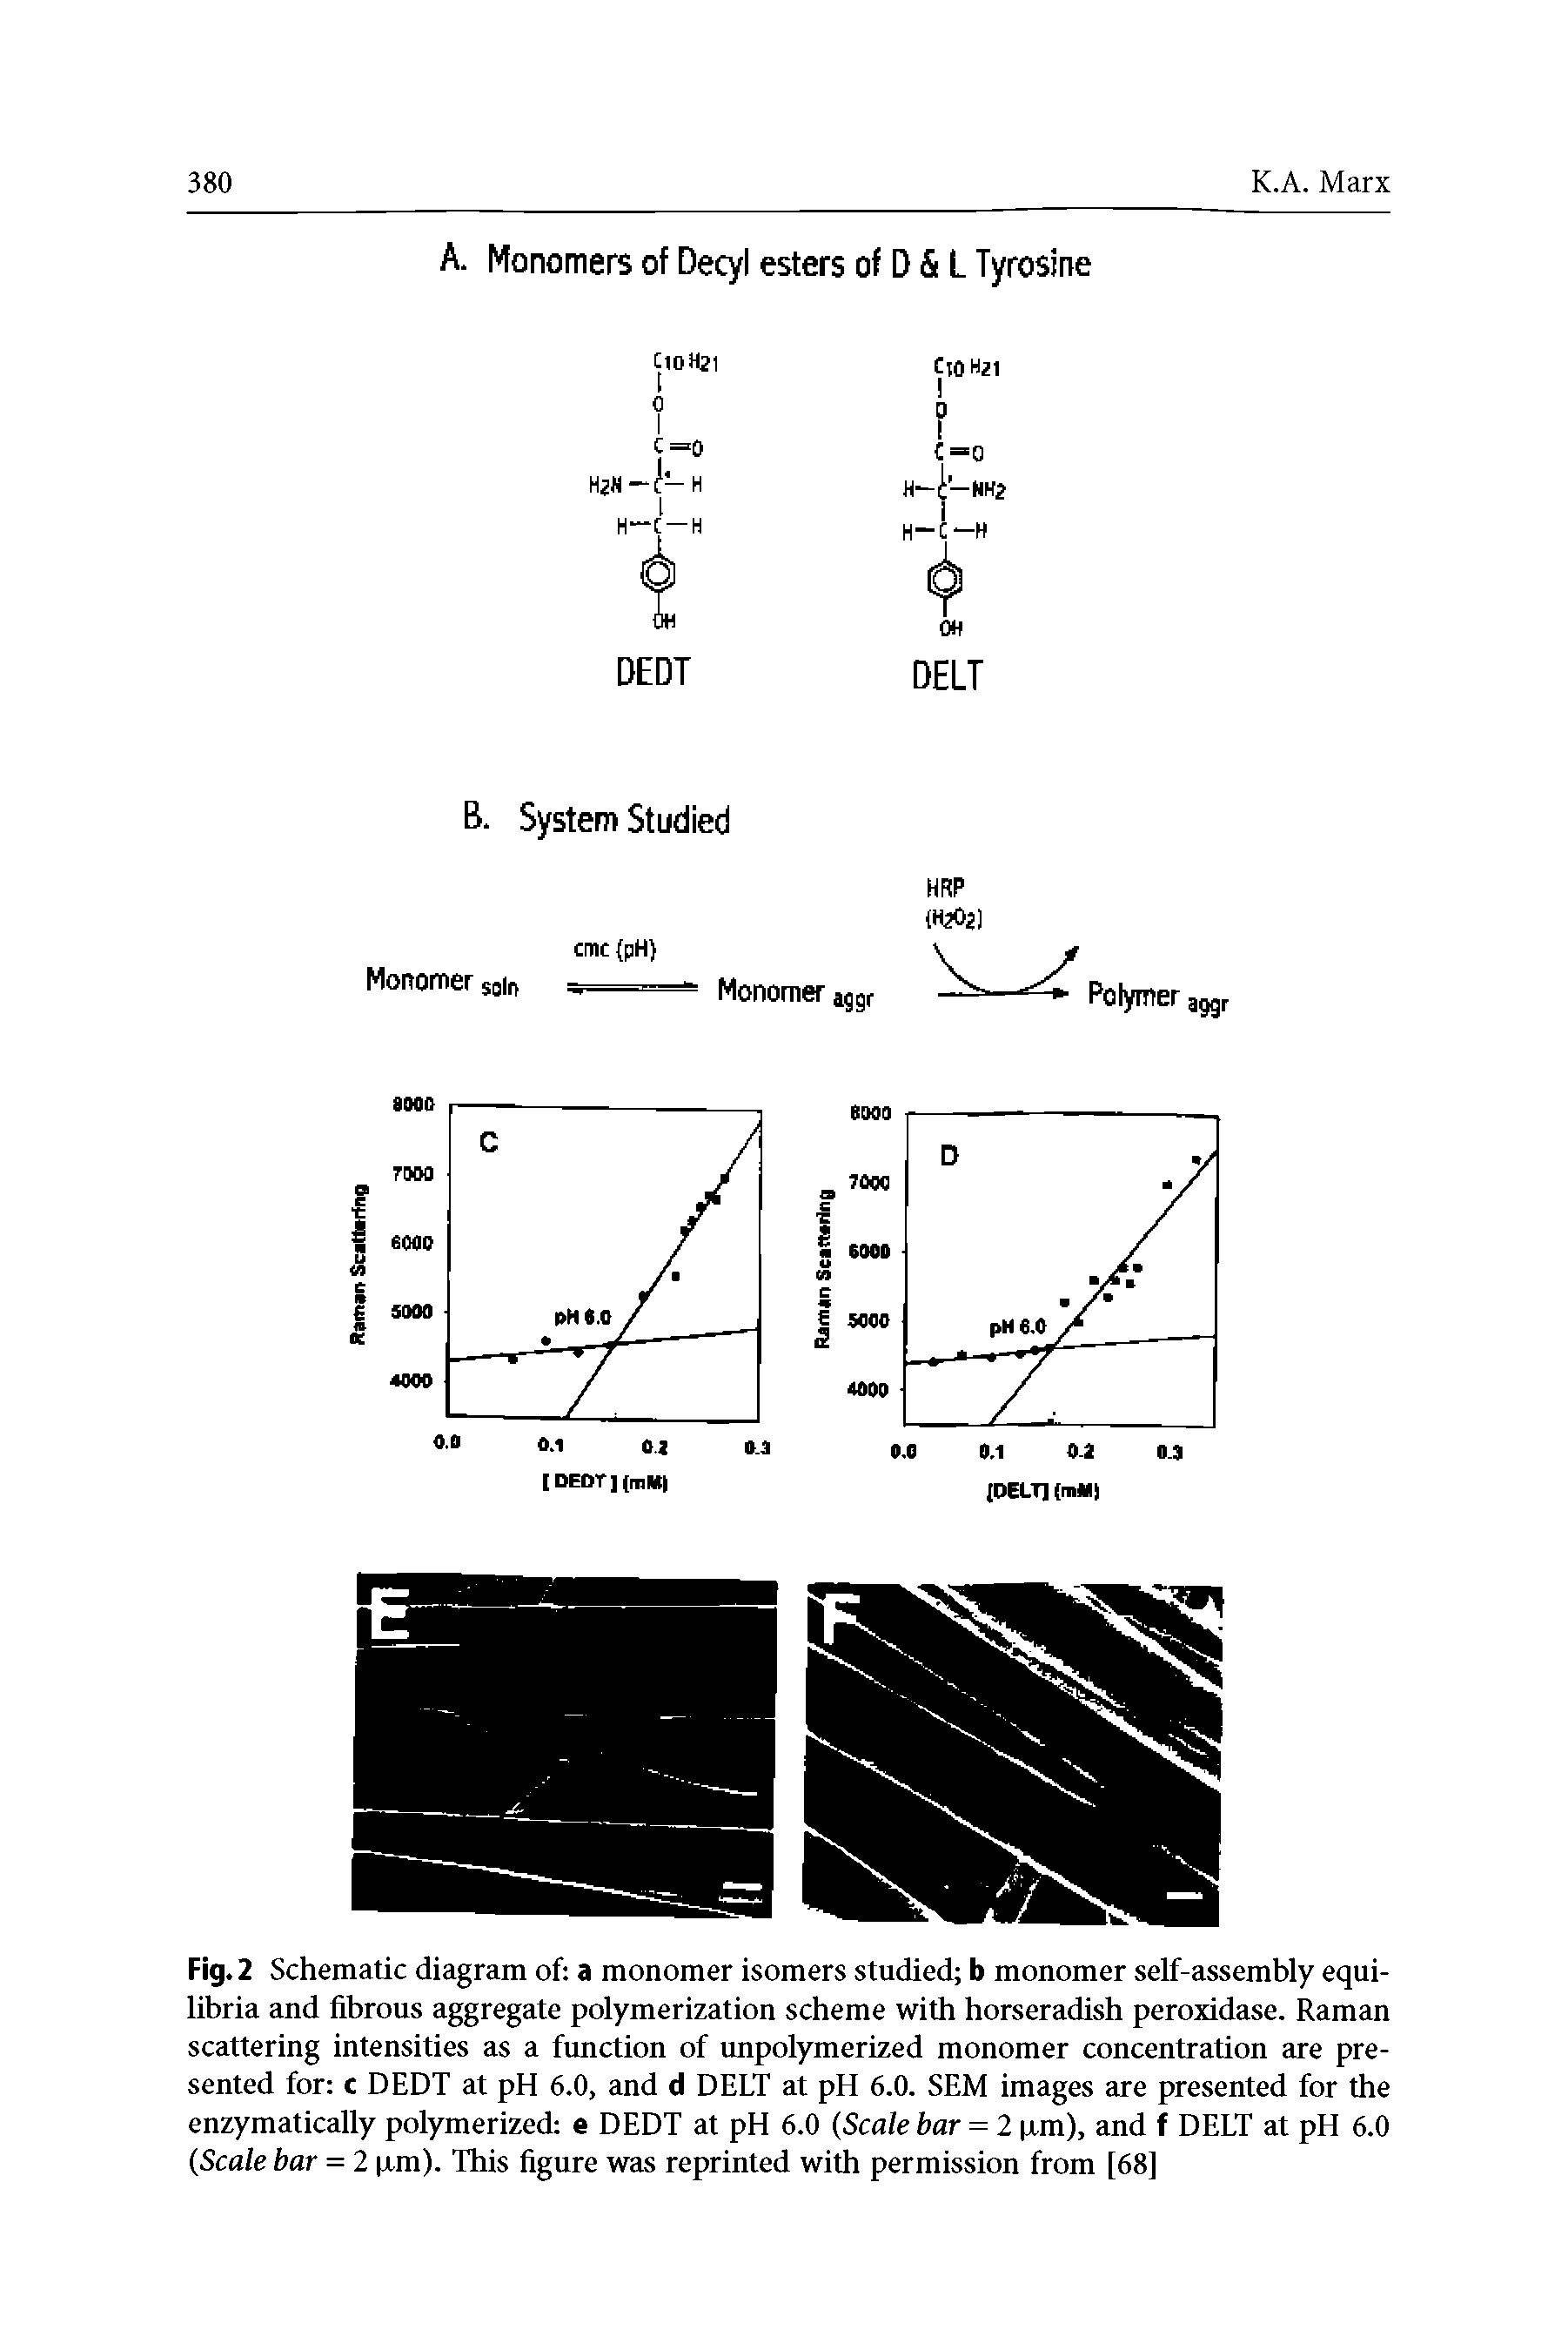 Fig. 2 Schematic diagram of a monomer isomers studied b monomer self-assembly equilibria and fibrous aggregate polymerization scheme with horseradish peroxidase. Raman scattering intensities as a function of unpolymerized monomer concentration are presented for c DEDT at pH 6.0, and d DELT at pH 6.0. SEM images are presented for the enzymatically polymerized e DEDT at pH 6.0 Scale bar = 2 jxm), and f DELT at pH 6.0 Scale bar = 2 xm). This figure was reprinted with permission from [68]...